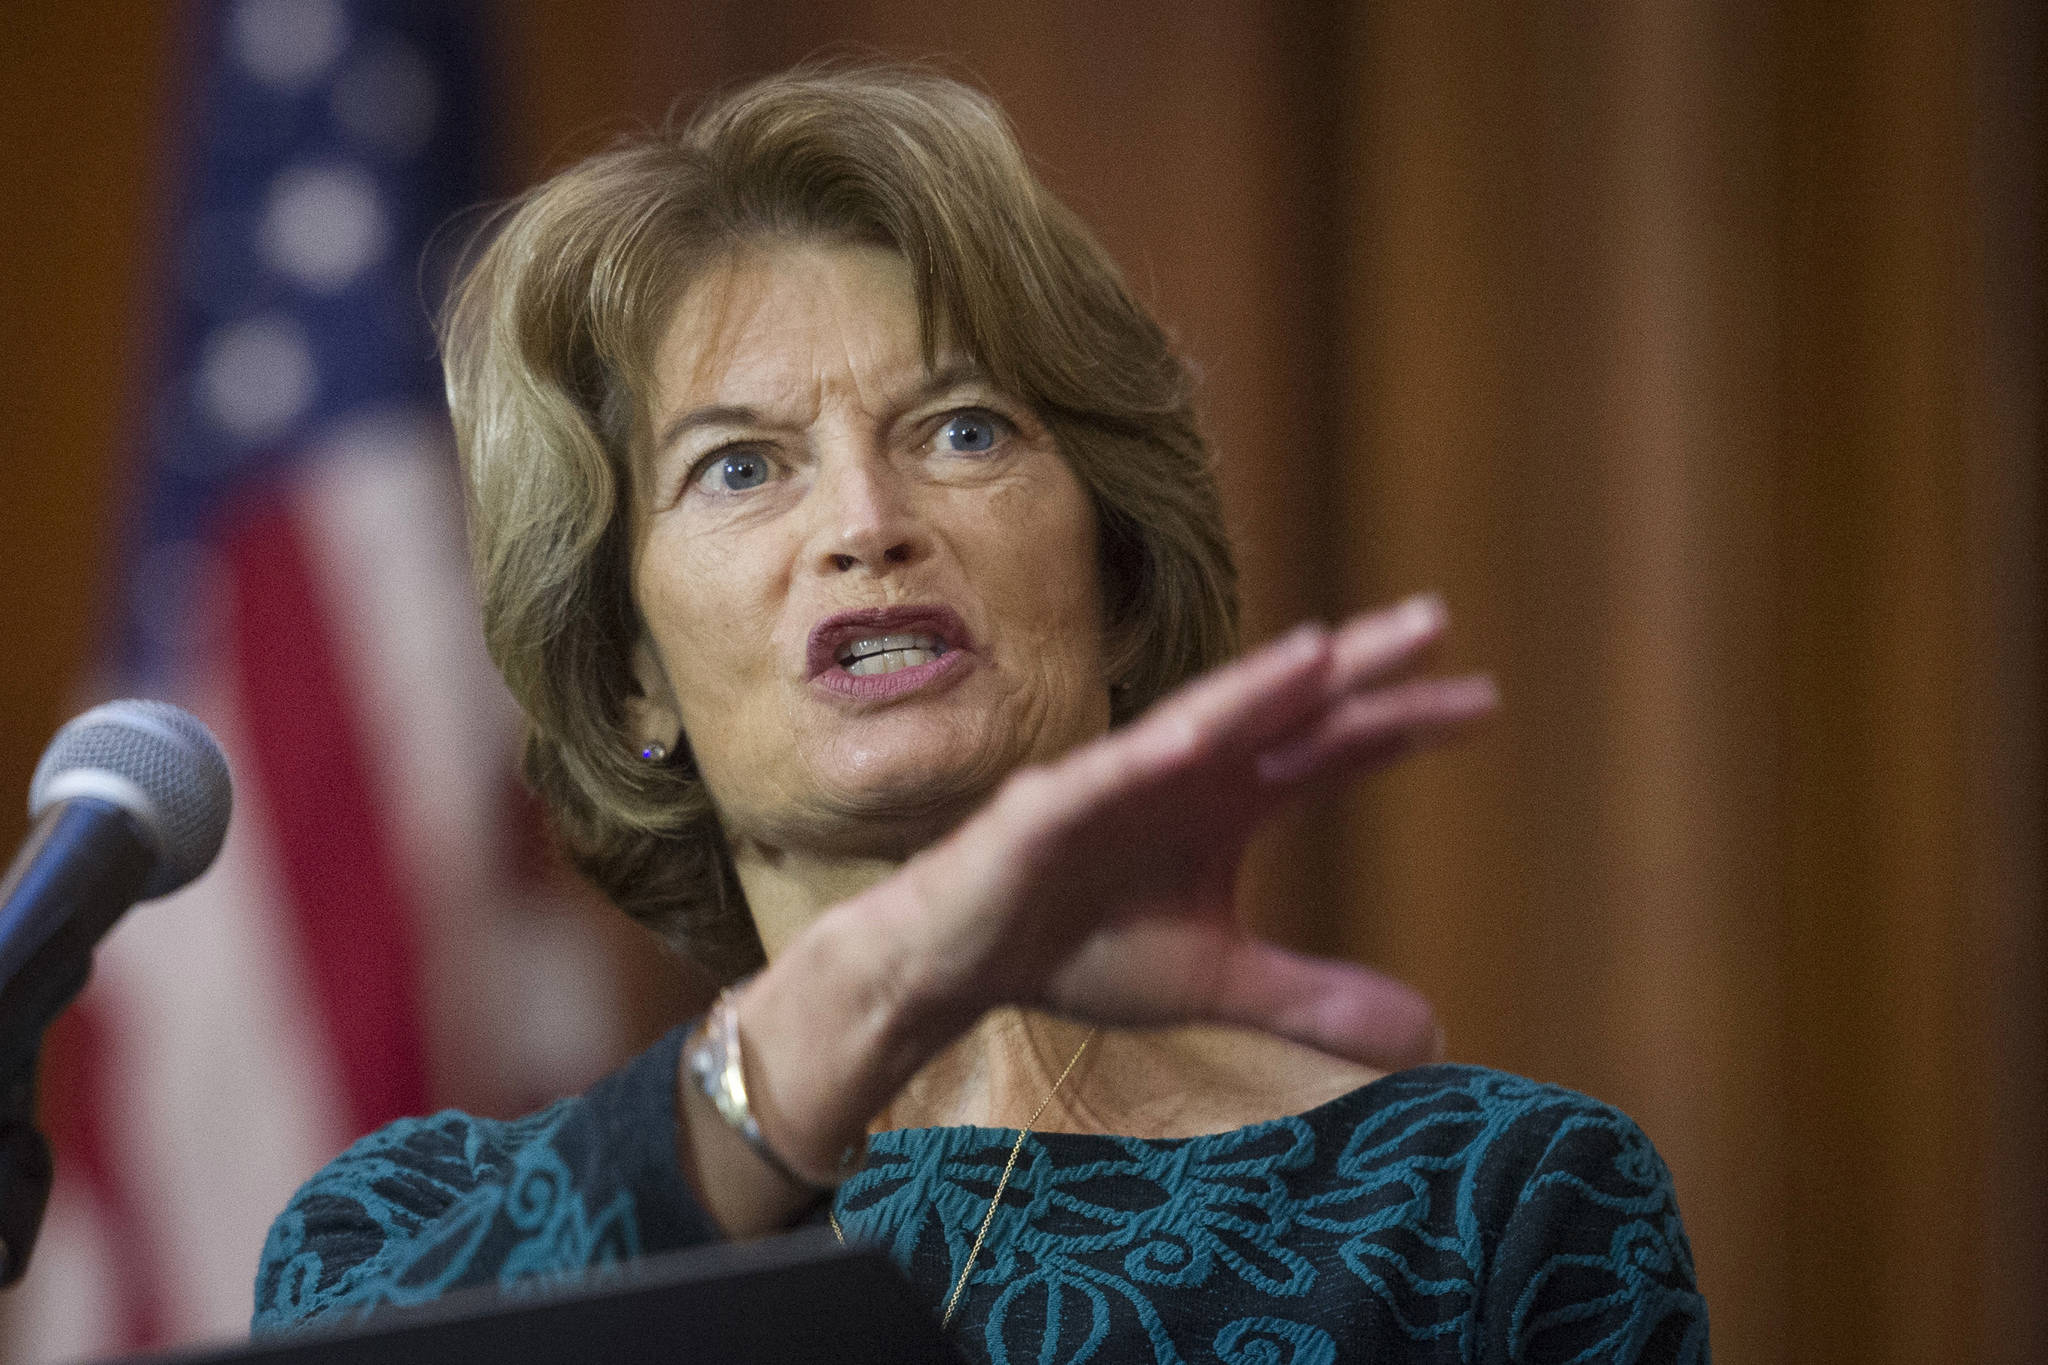 Sen. Lisa Murkowski, R-Alaska, speaks after an order withdrawing federal protections for countless waterways and wetland was signed at EPA headquarters in Washington, D.C. on Tuesday, Dec. 11, 2018. (Cliff Owen | Associated Press File)